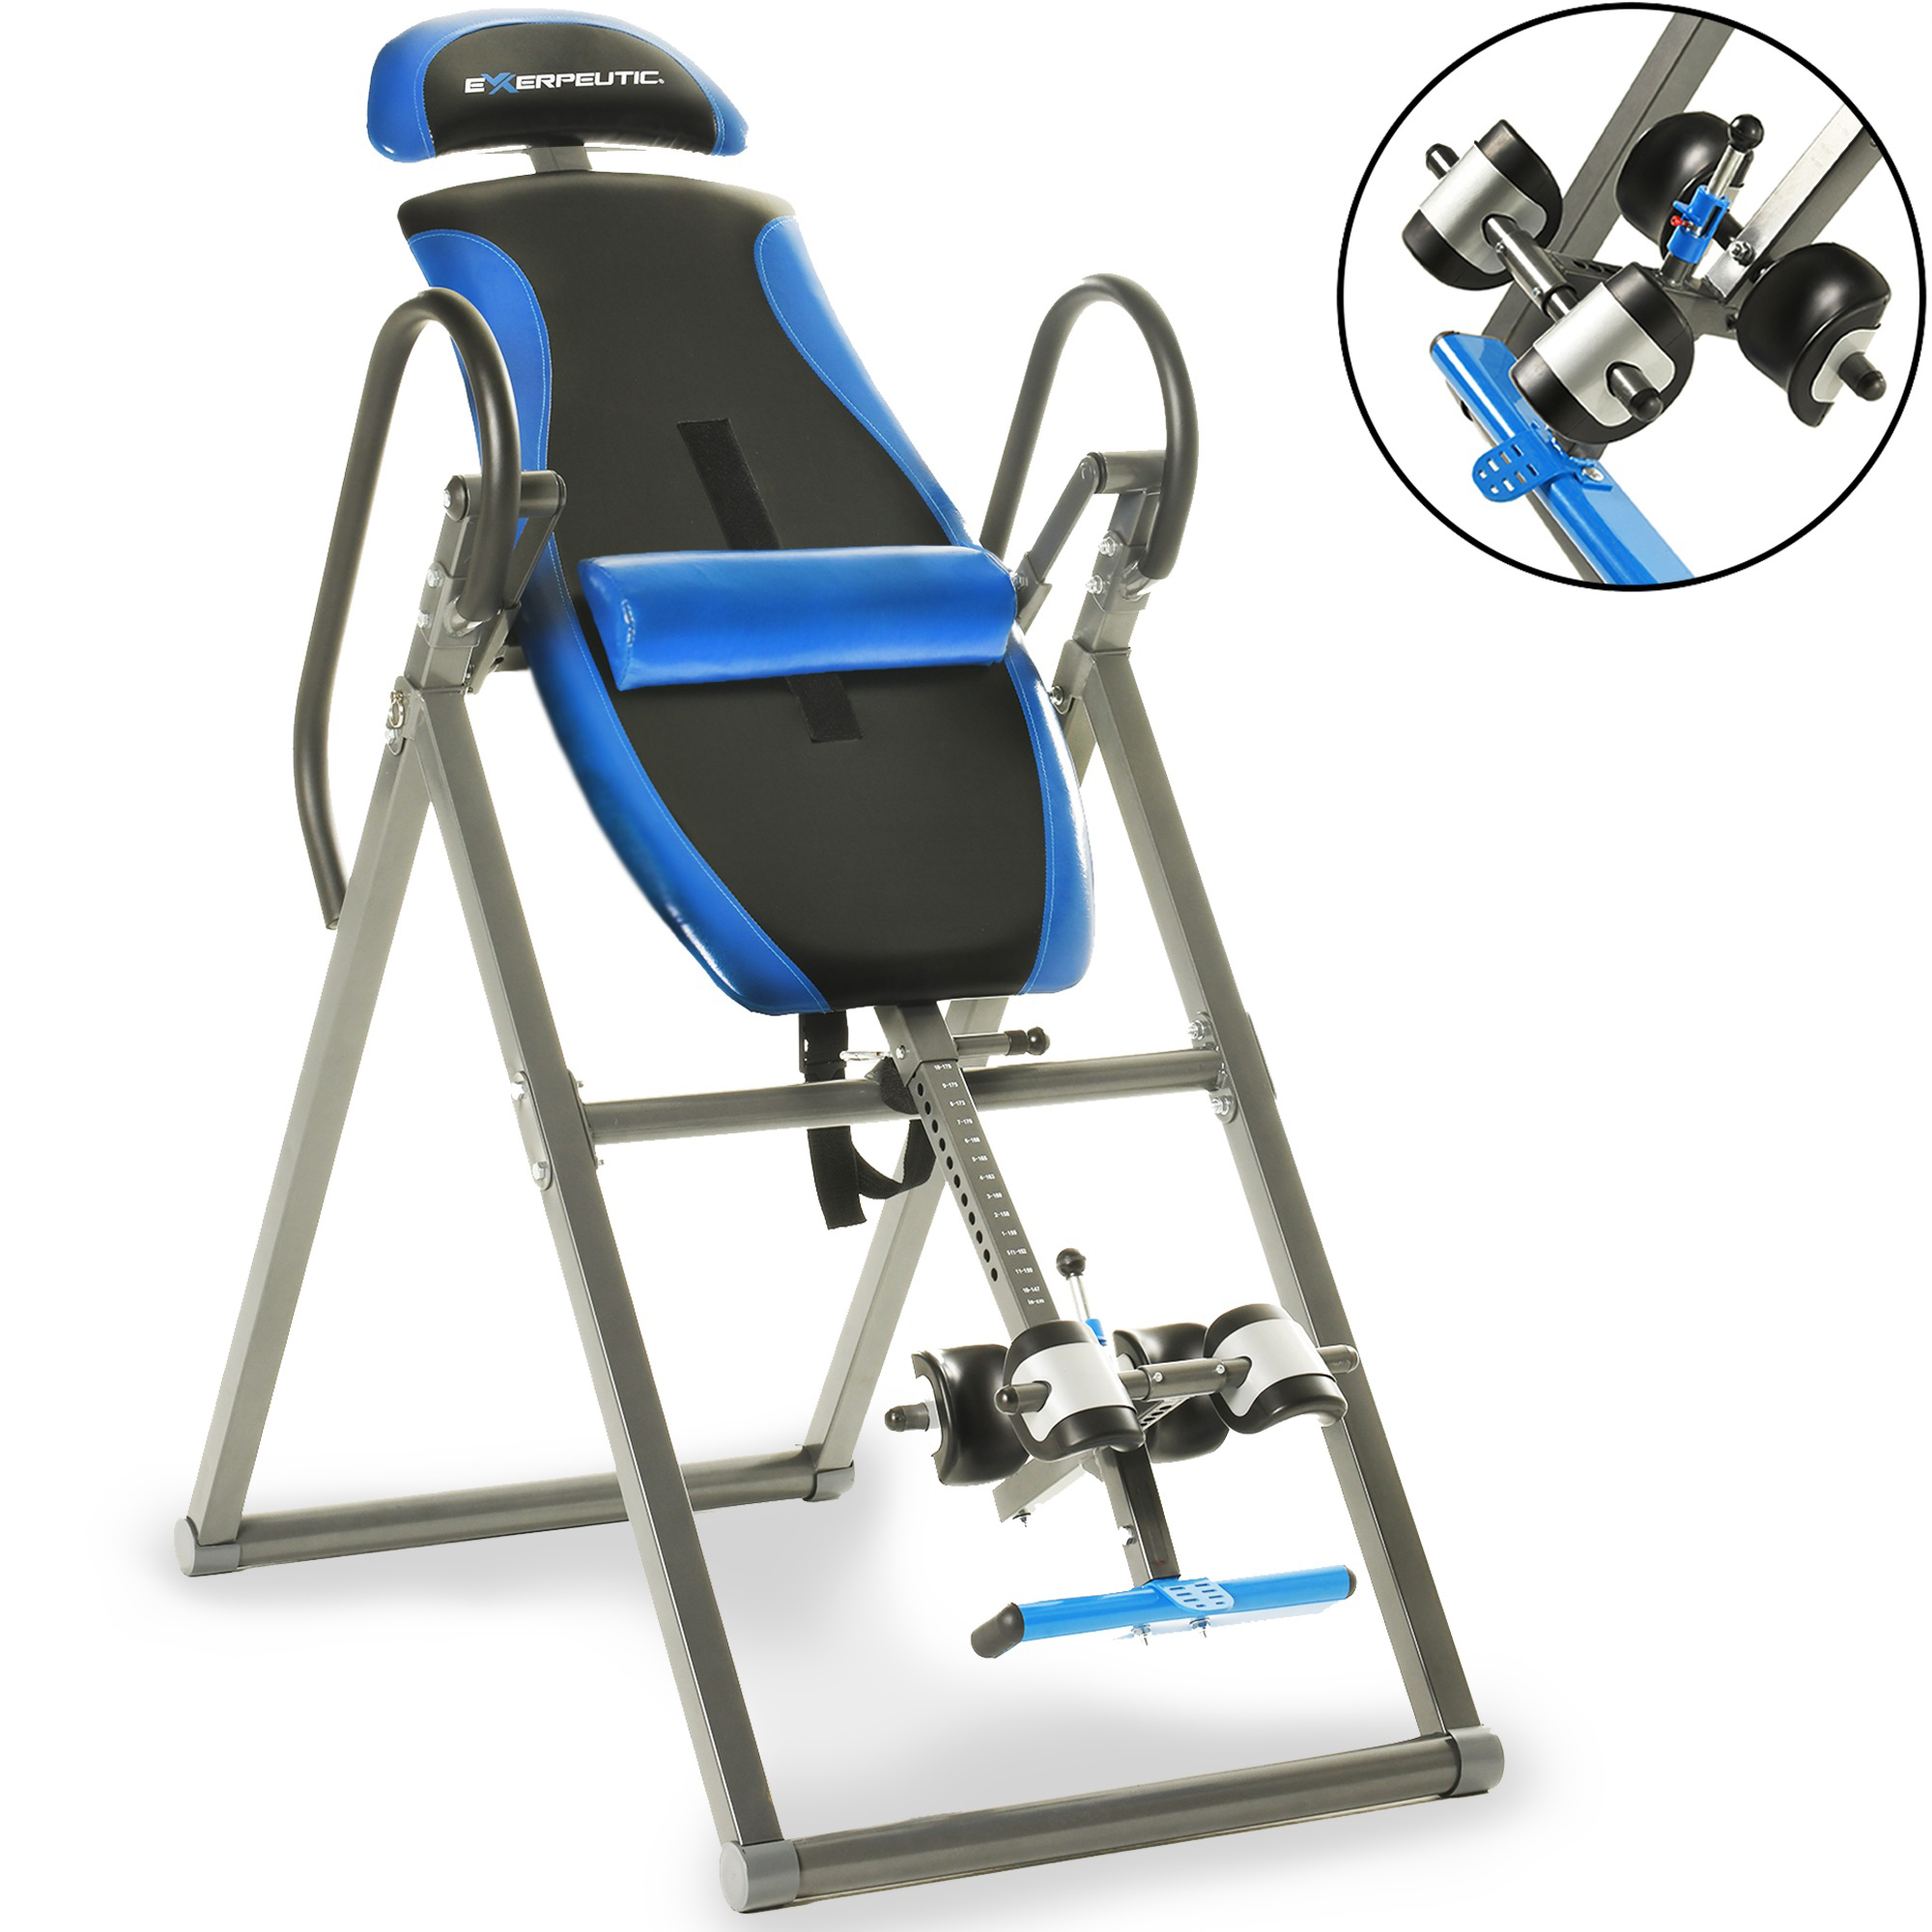 Exerpeutic 150L Triple Safety Locking Inversion Table with Secondary Auto Safety Lock, Visual Lock Indicator and Lumbar Pillow - image 1 of 5